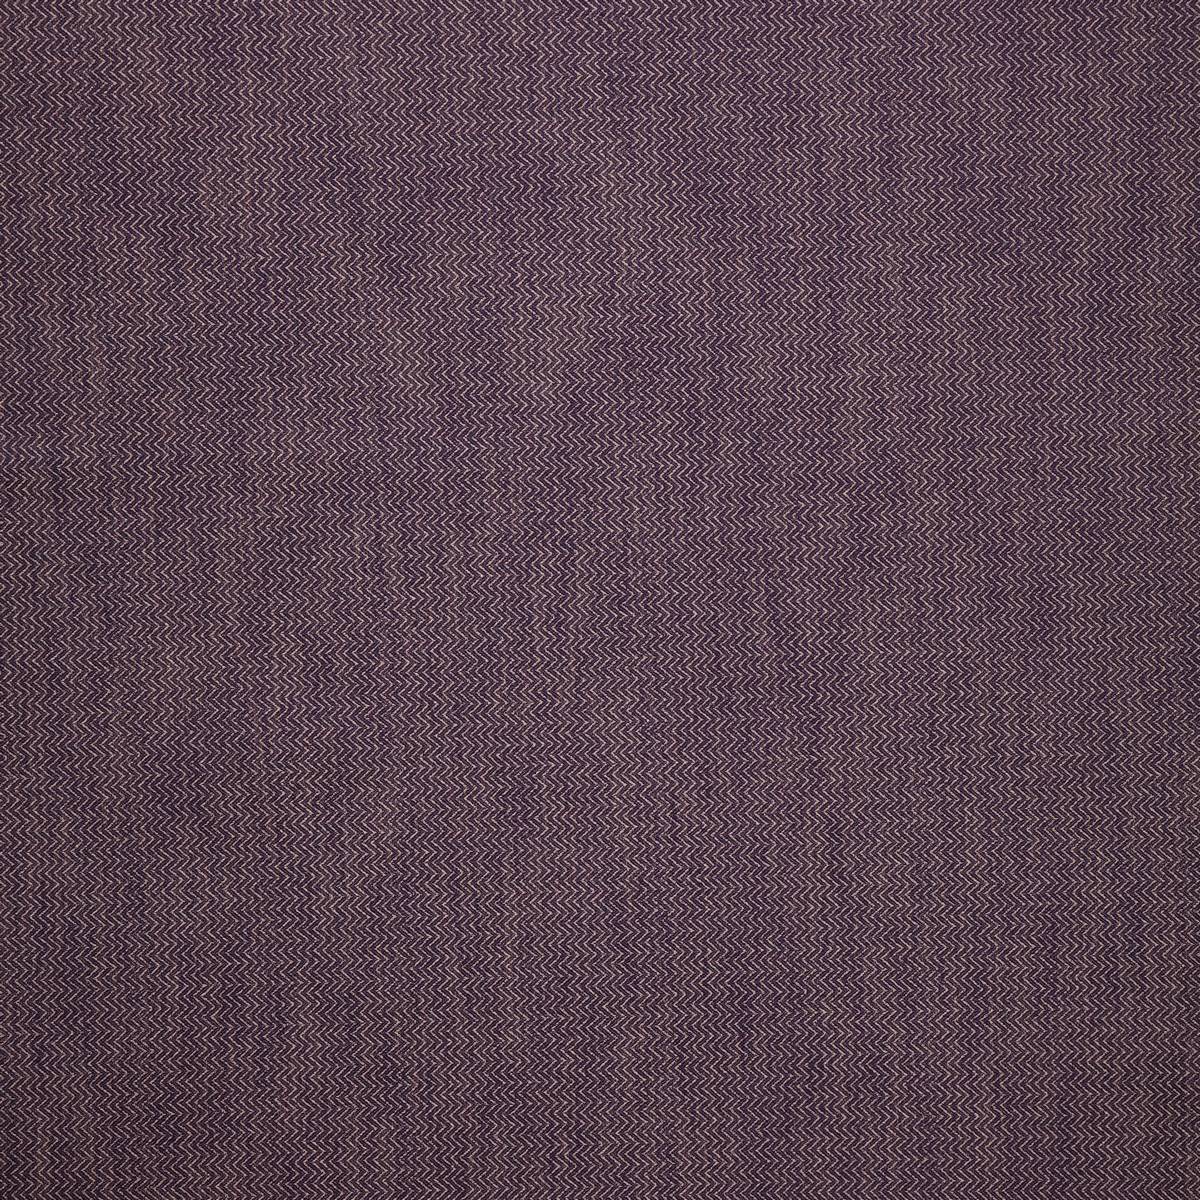 Bowmore Cassis Fabric by iLiv